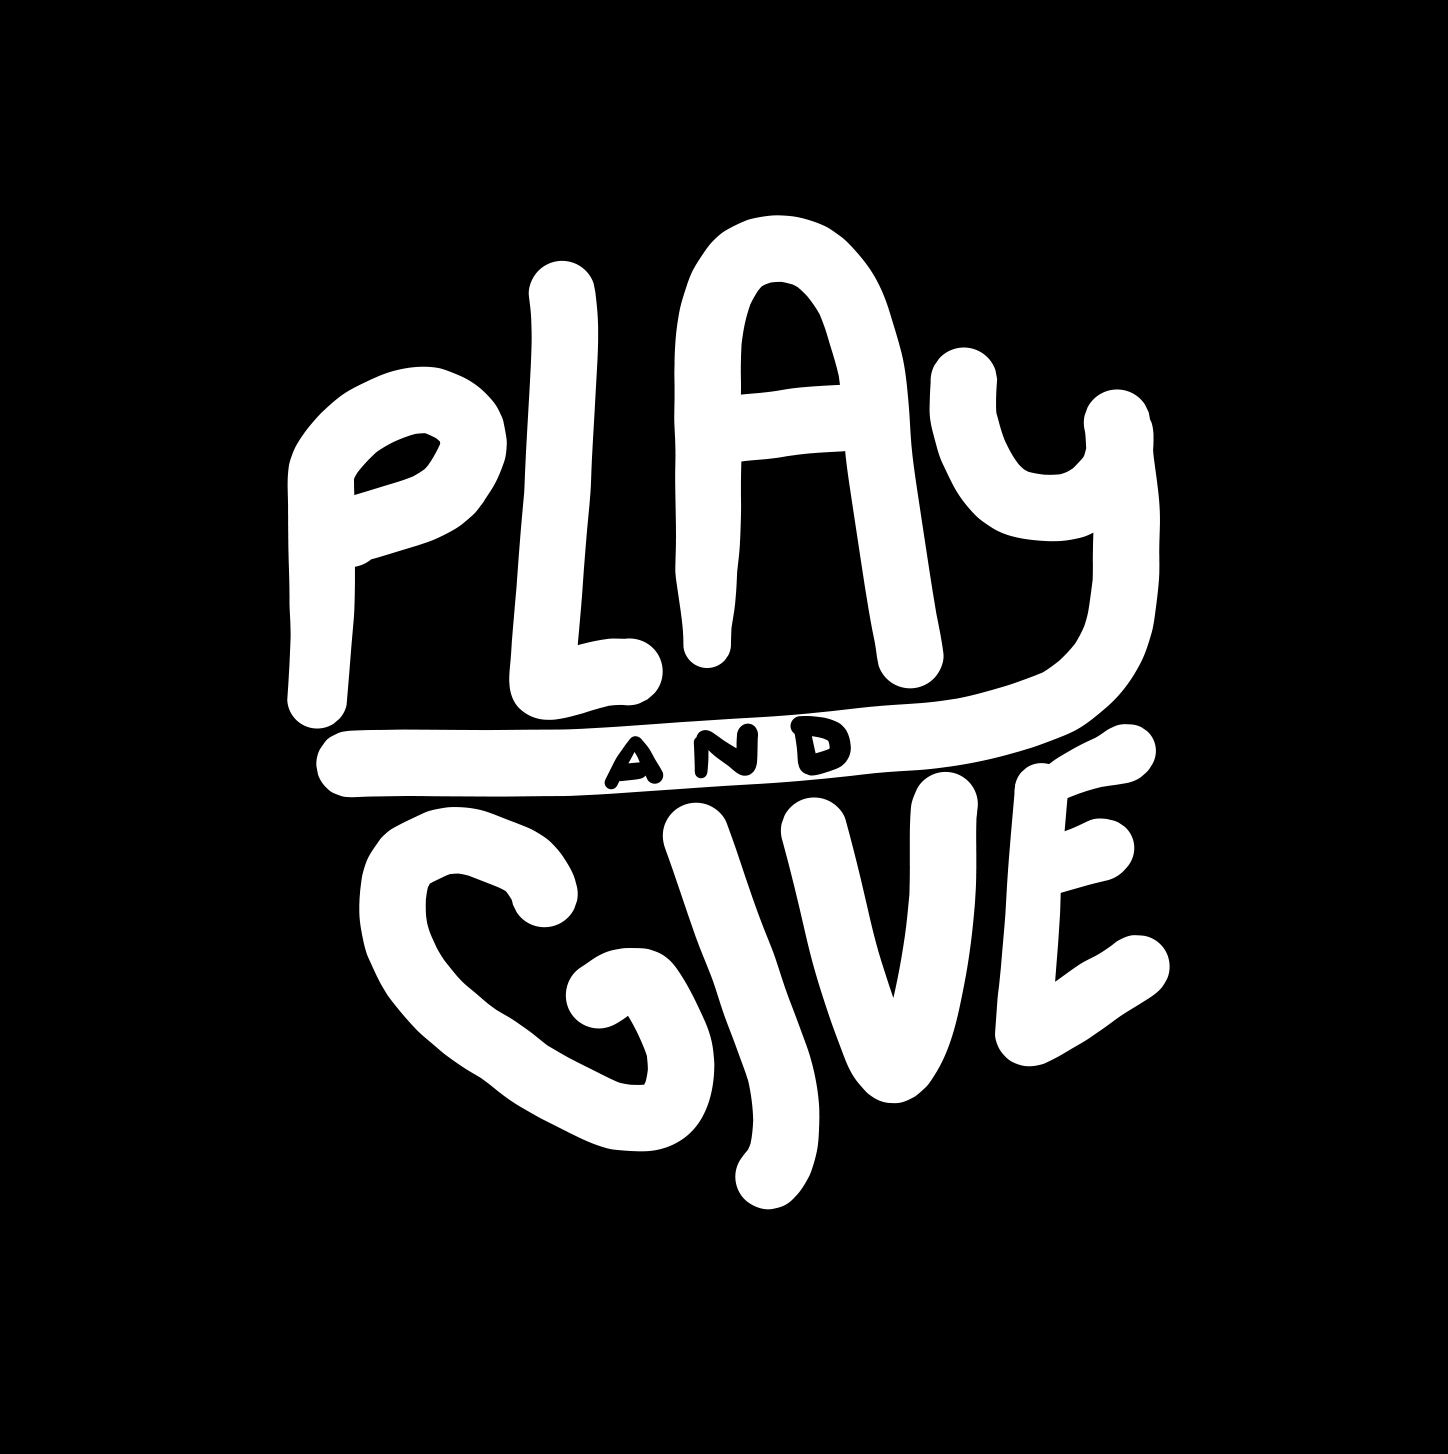 Play and give